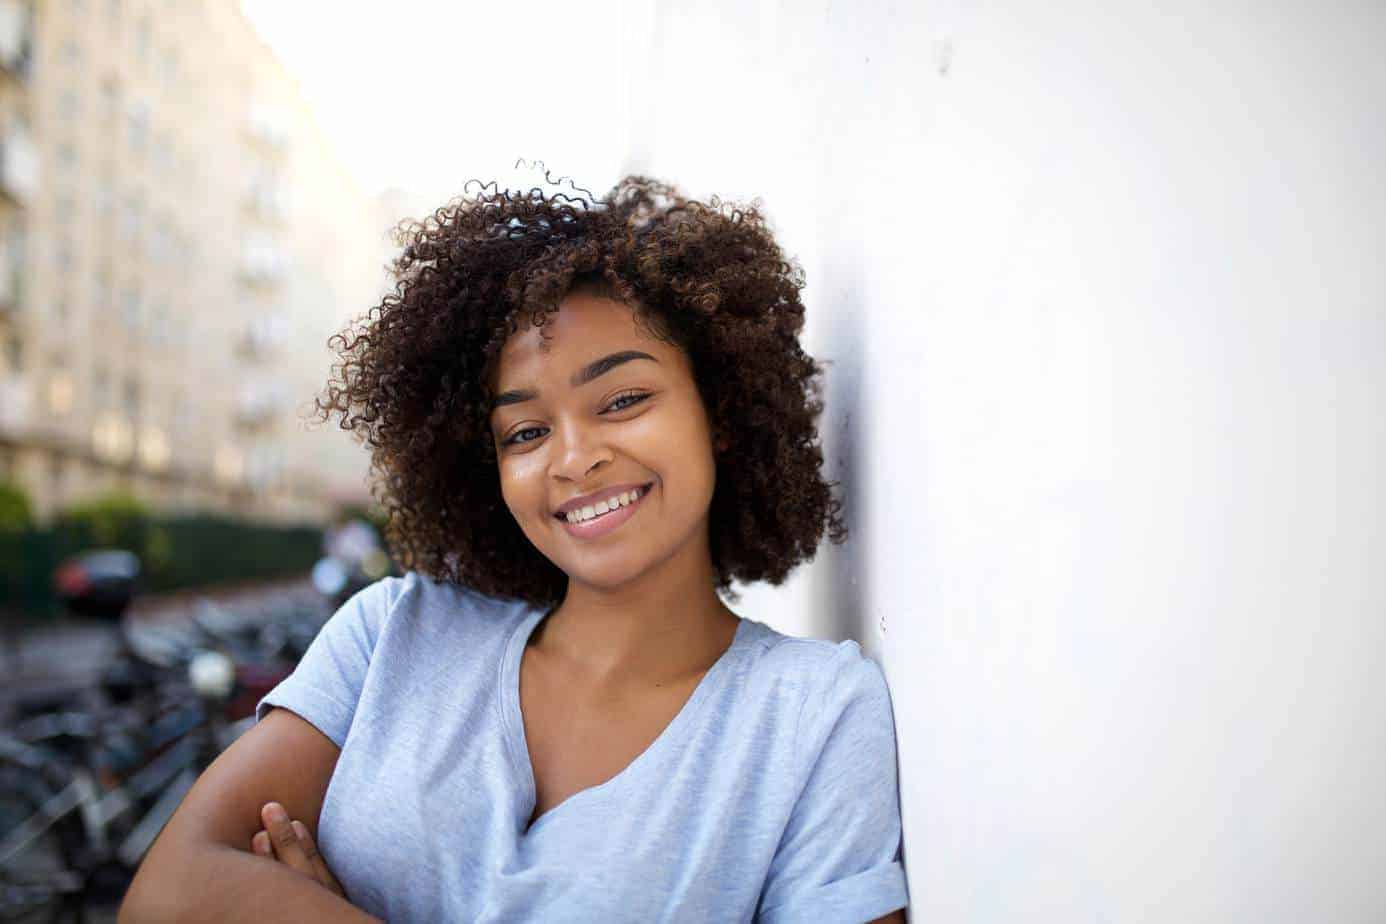 Cute young black girl leaning on a wall and smiling after using chebe powder after reading a quote from Uchenna Okereke.